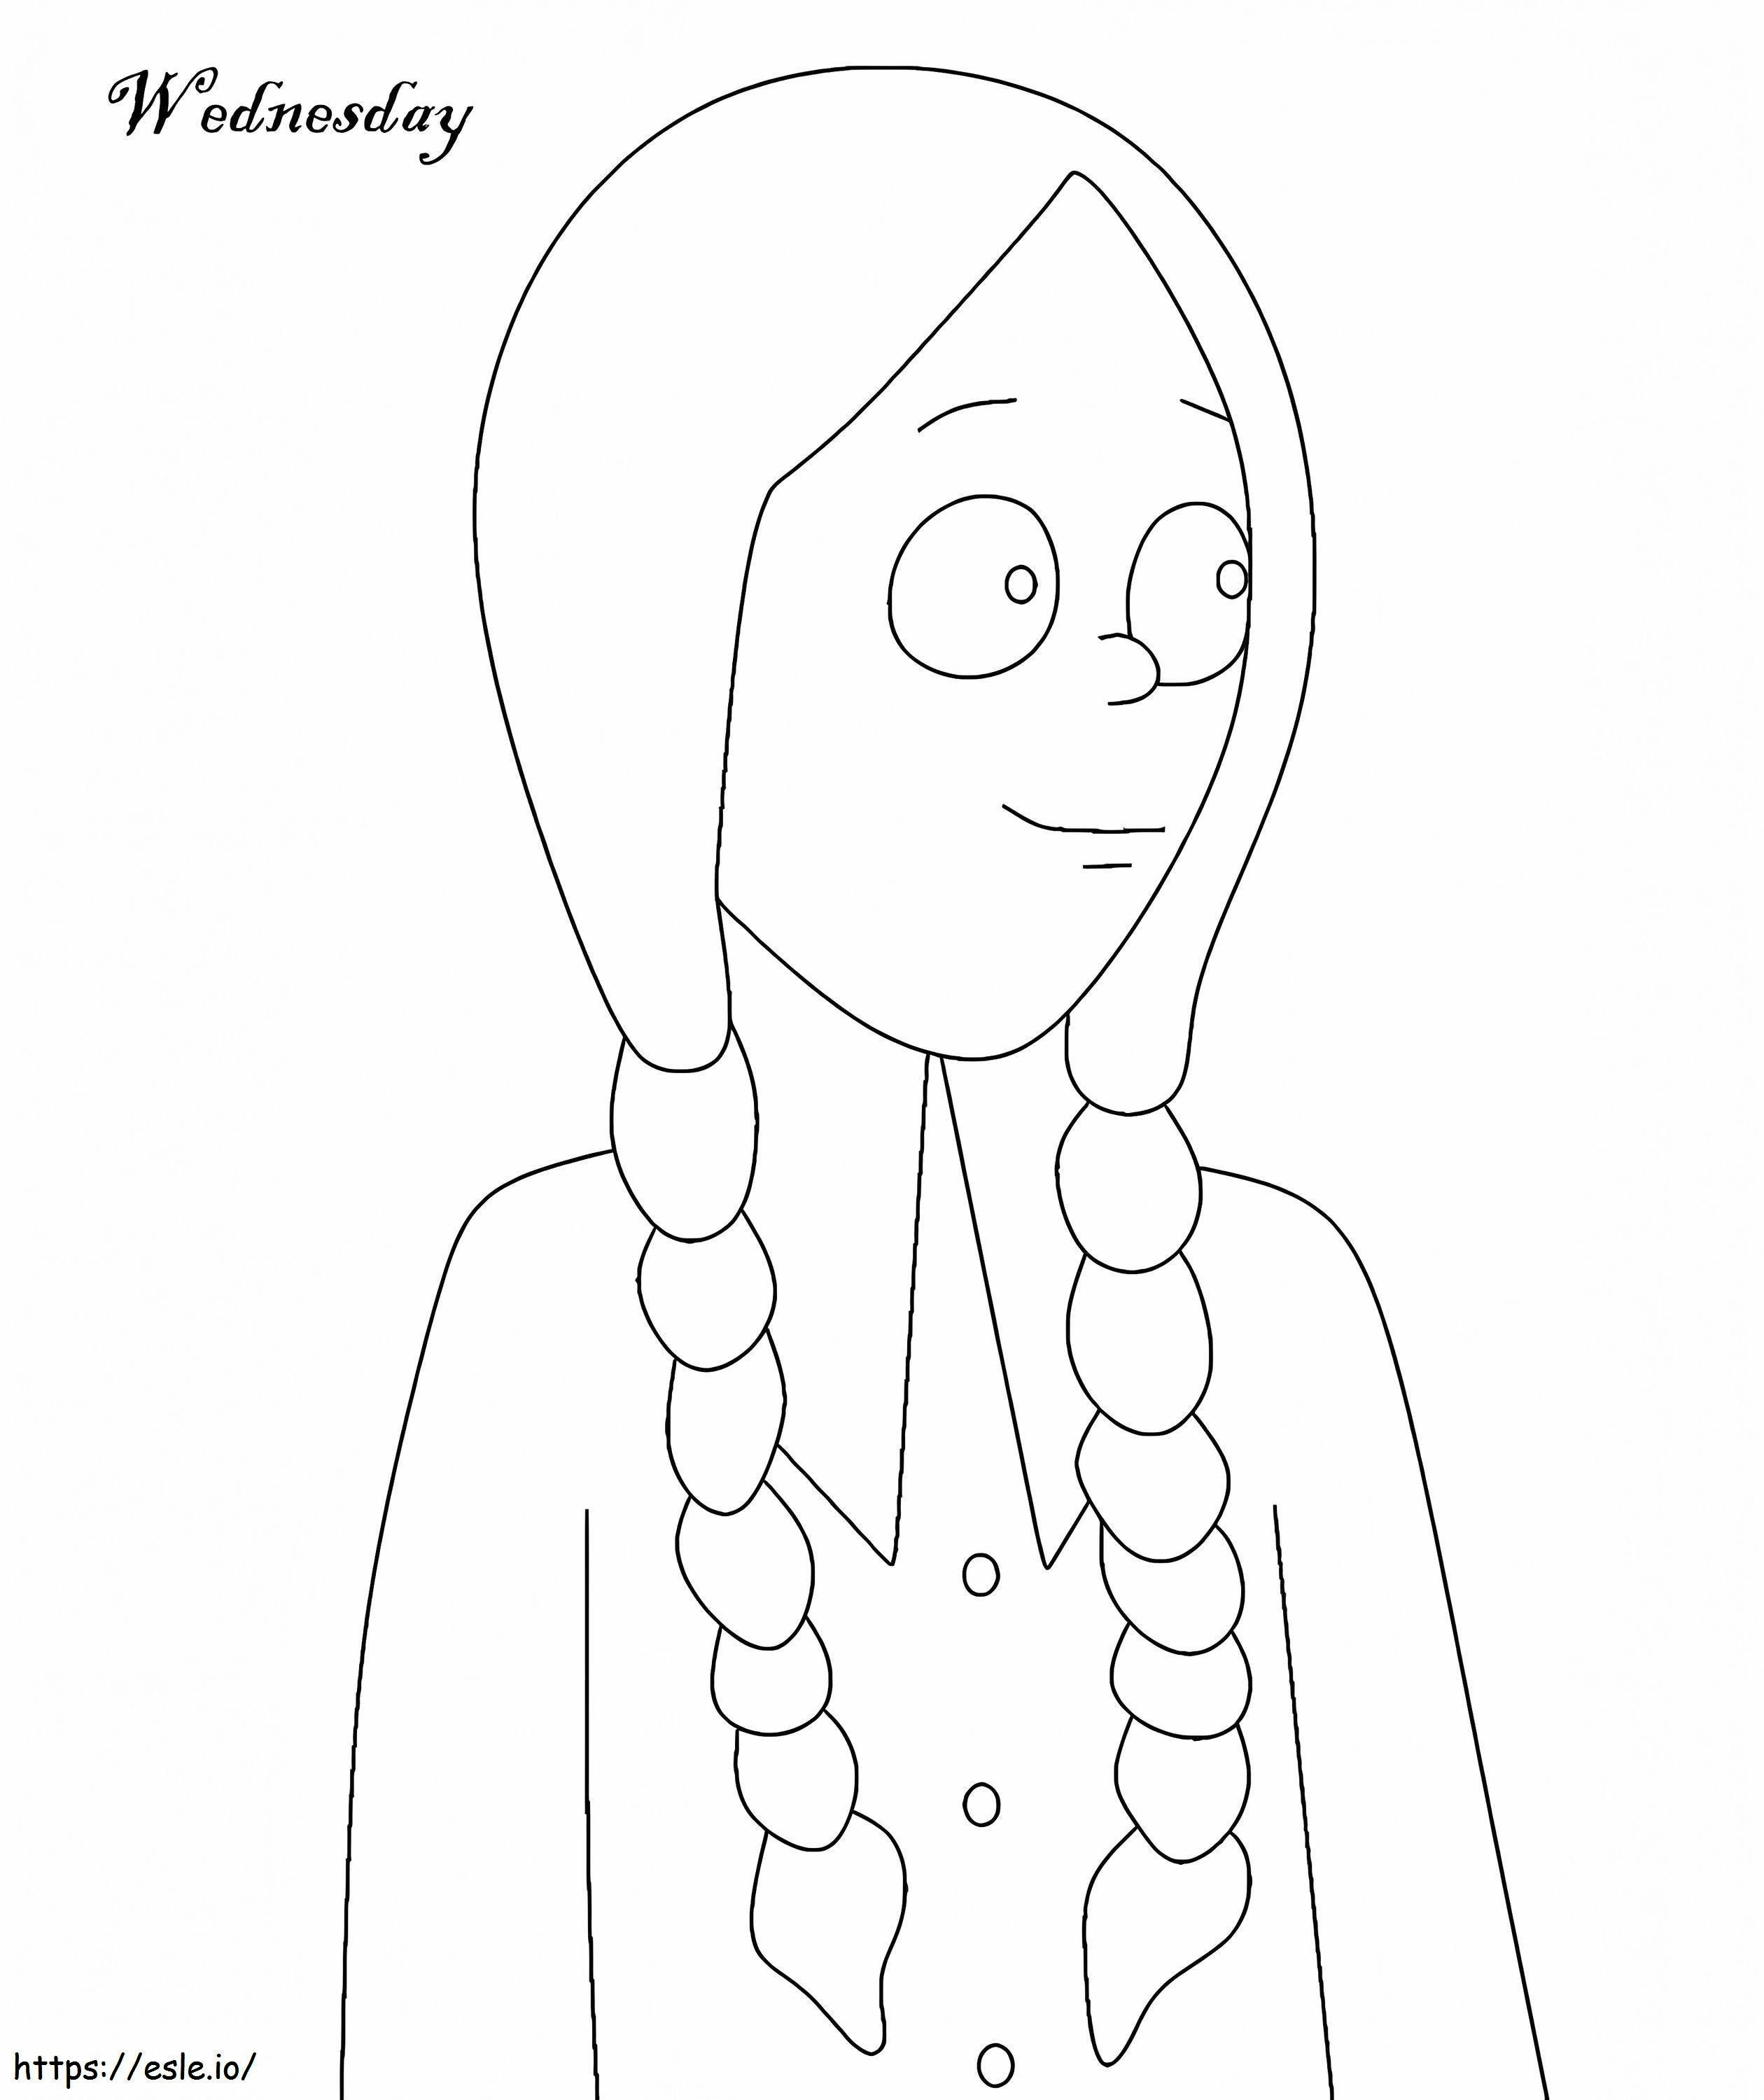 Wednesday Addams coloring page